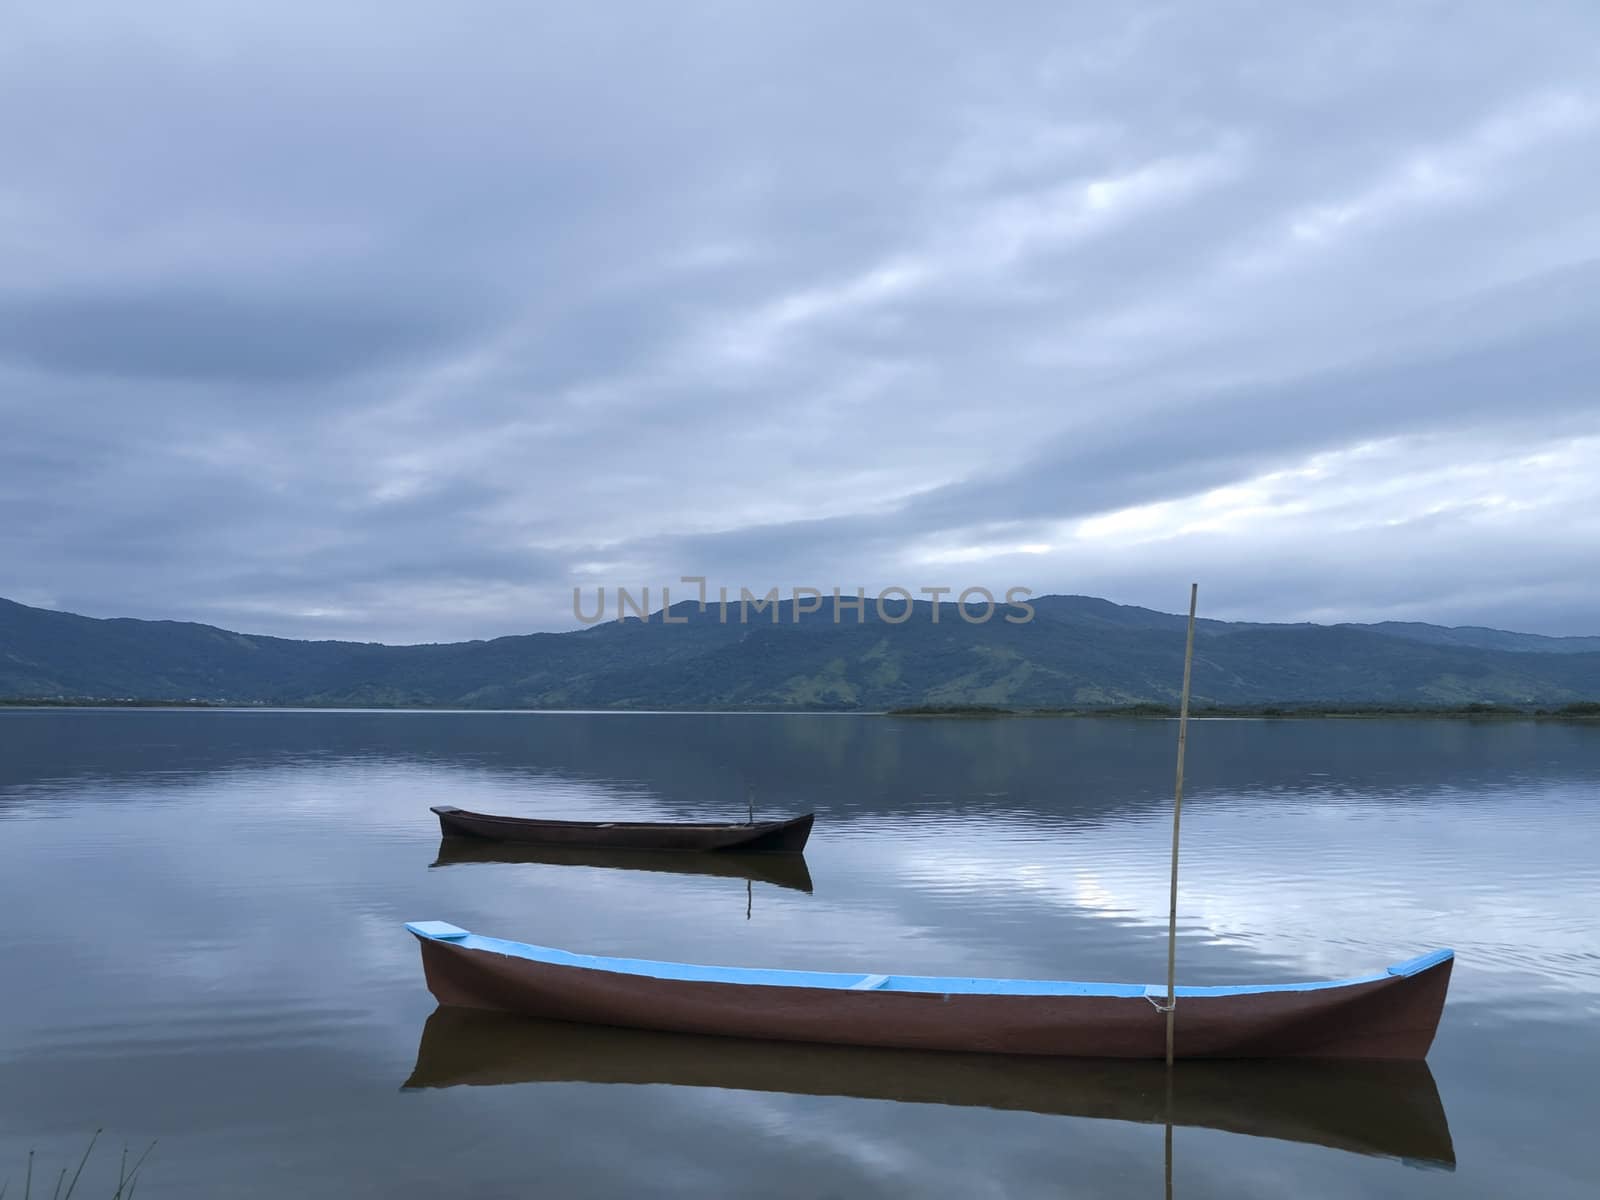 Two canoes tied on a quiet lake under a cloudy sky.